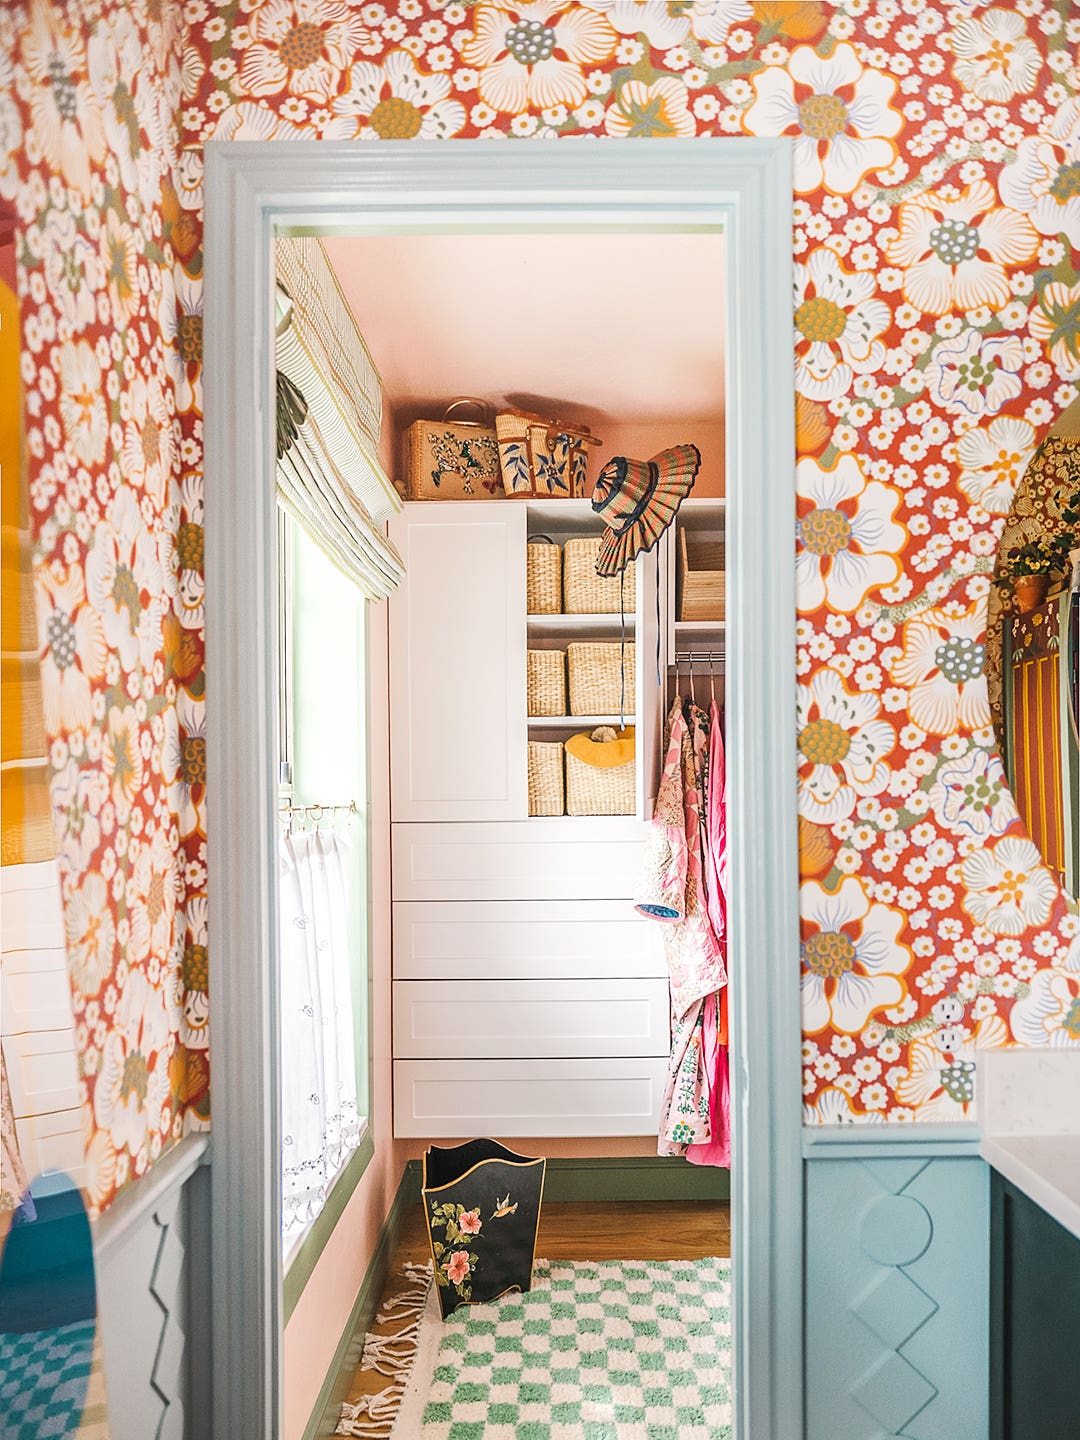 blue rectangular mirror, floral white and red wallpaper in a closet